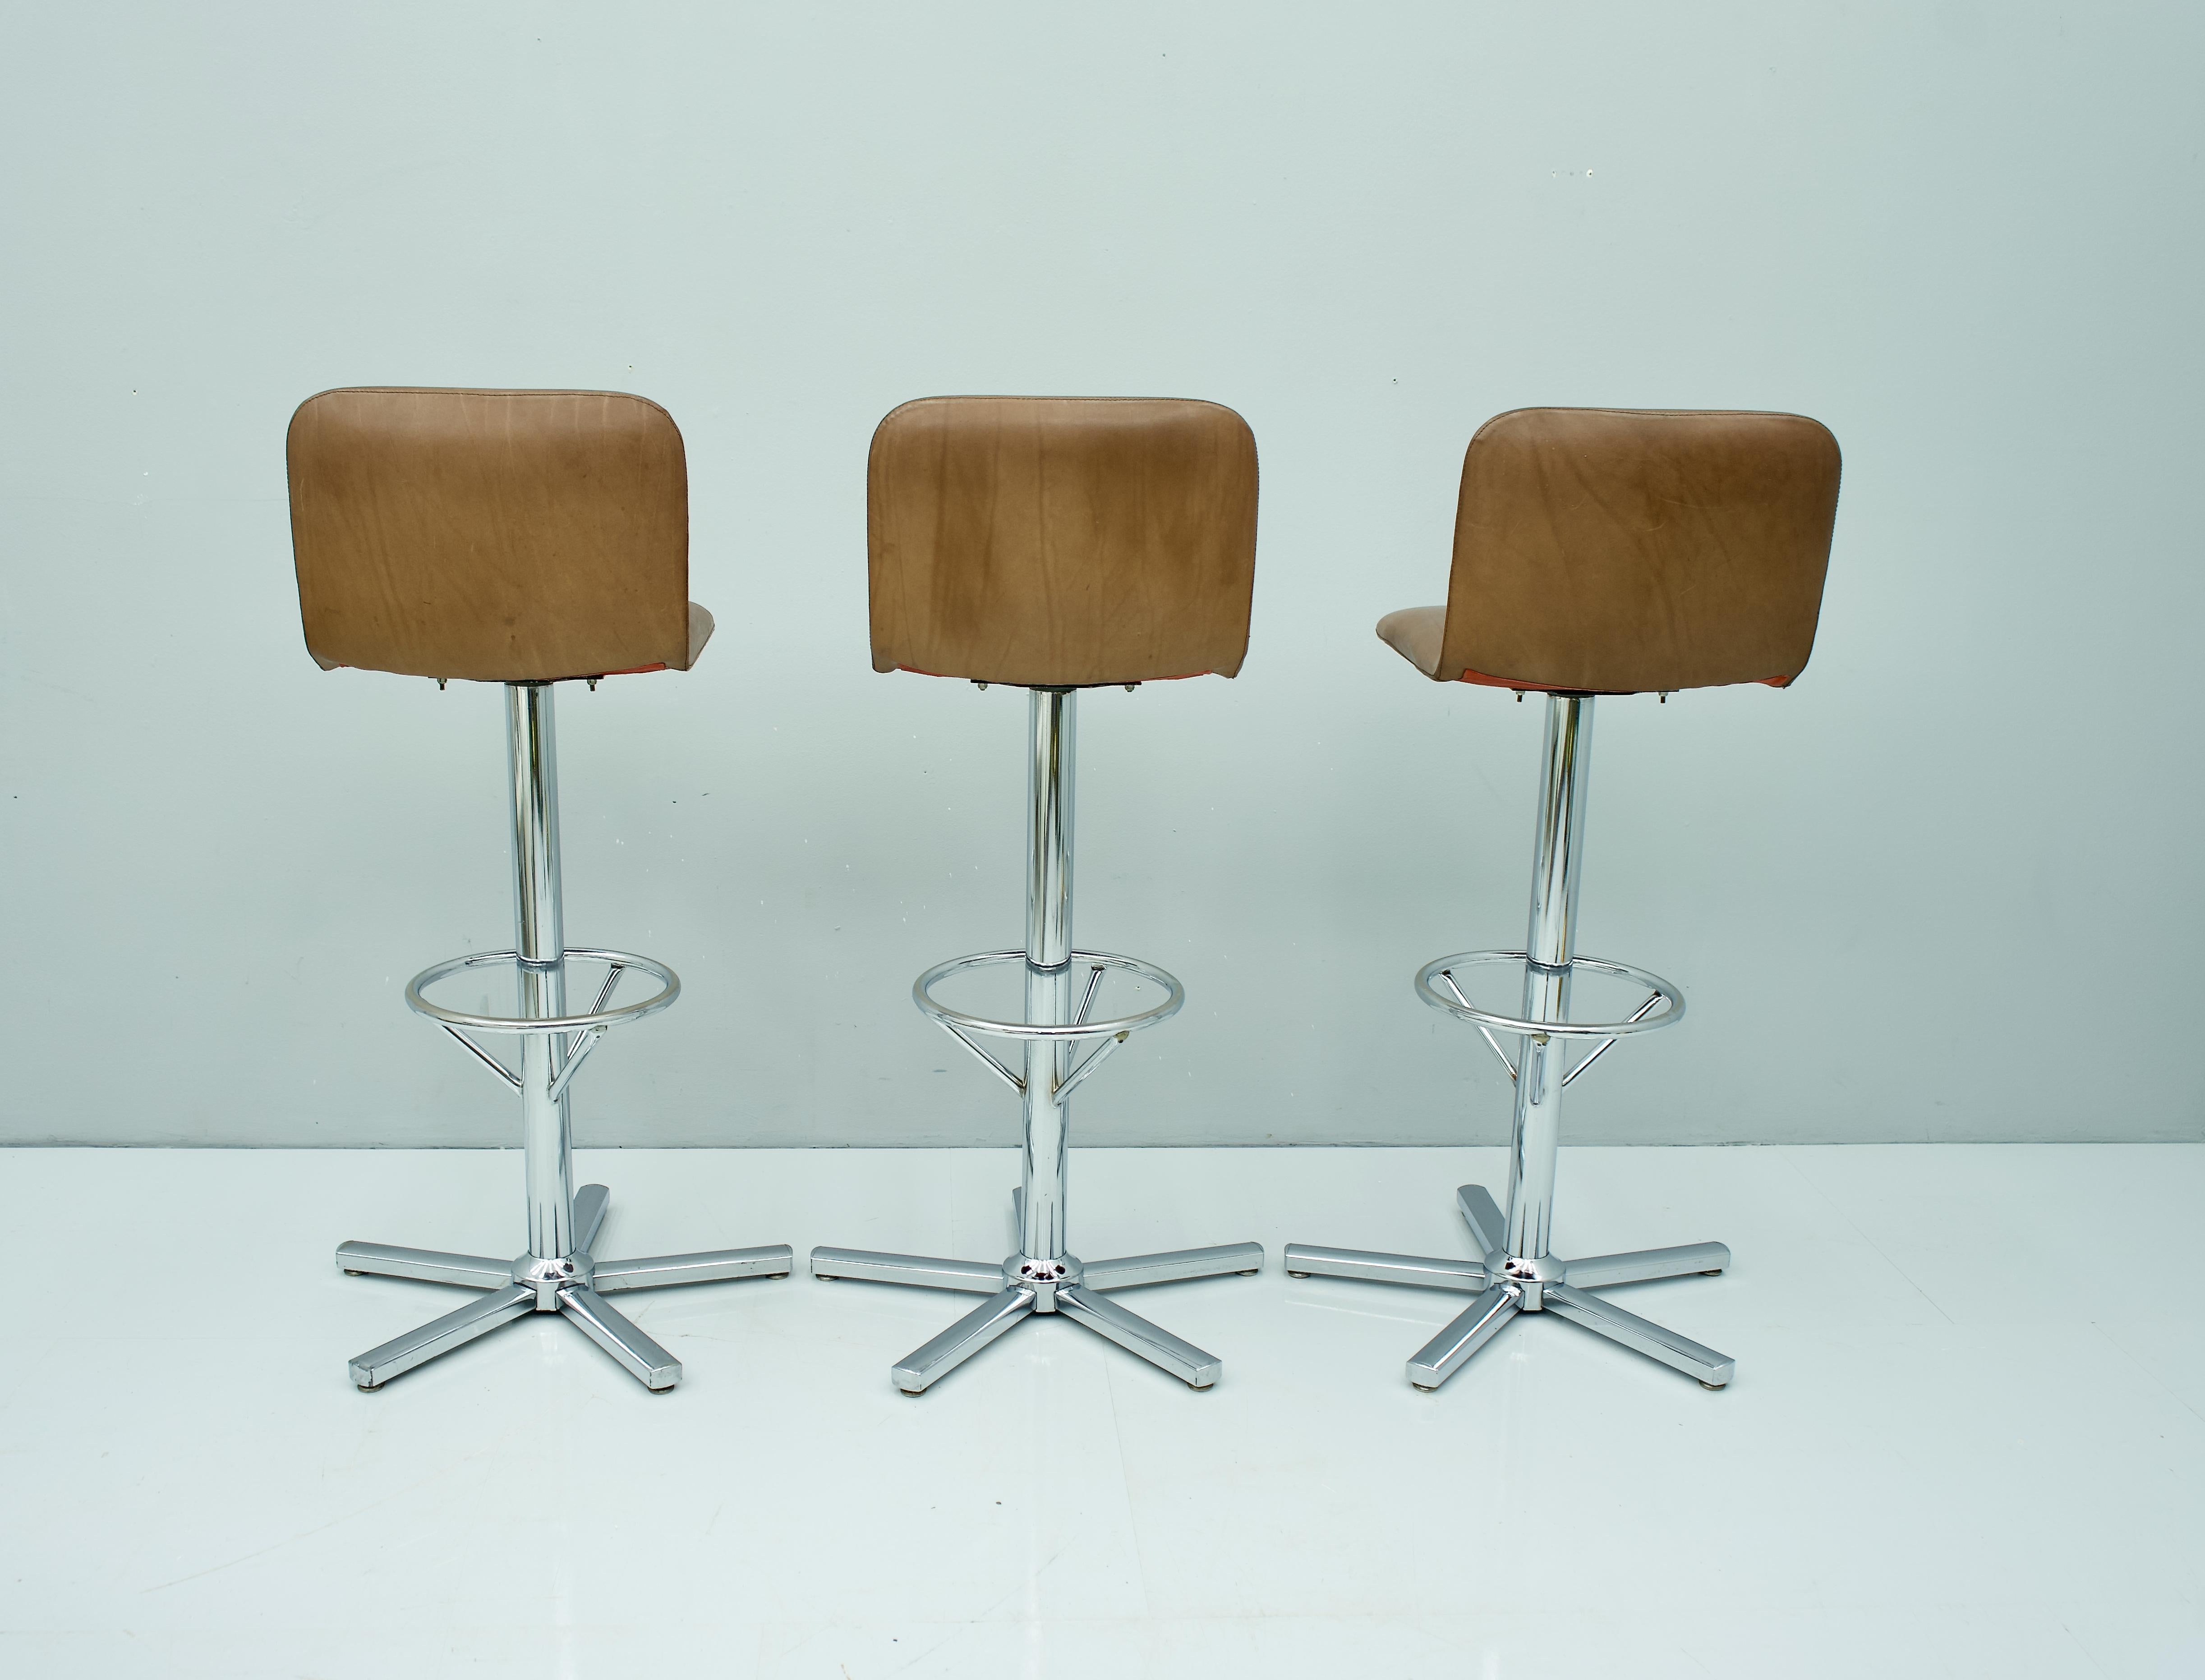 Late 20th Century Set of Three Swivel Bar Stools in Brown Leather and Chrome 1970s